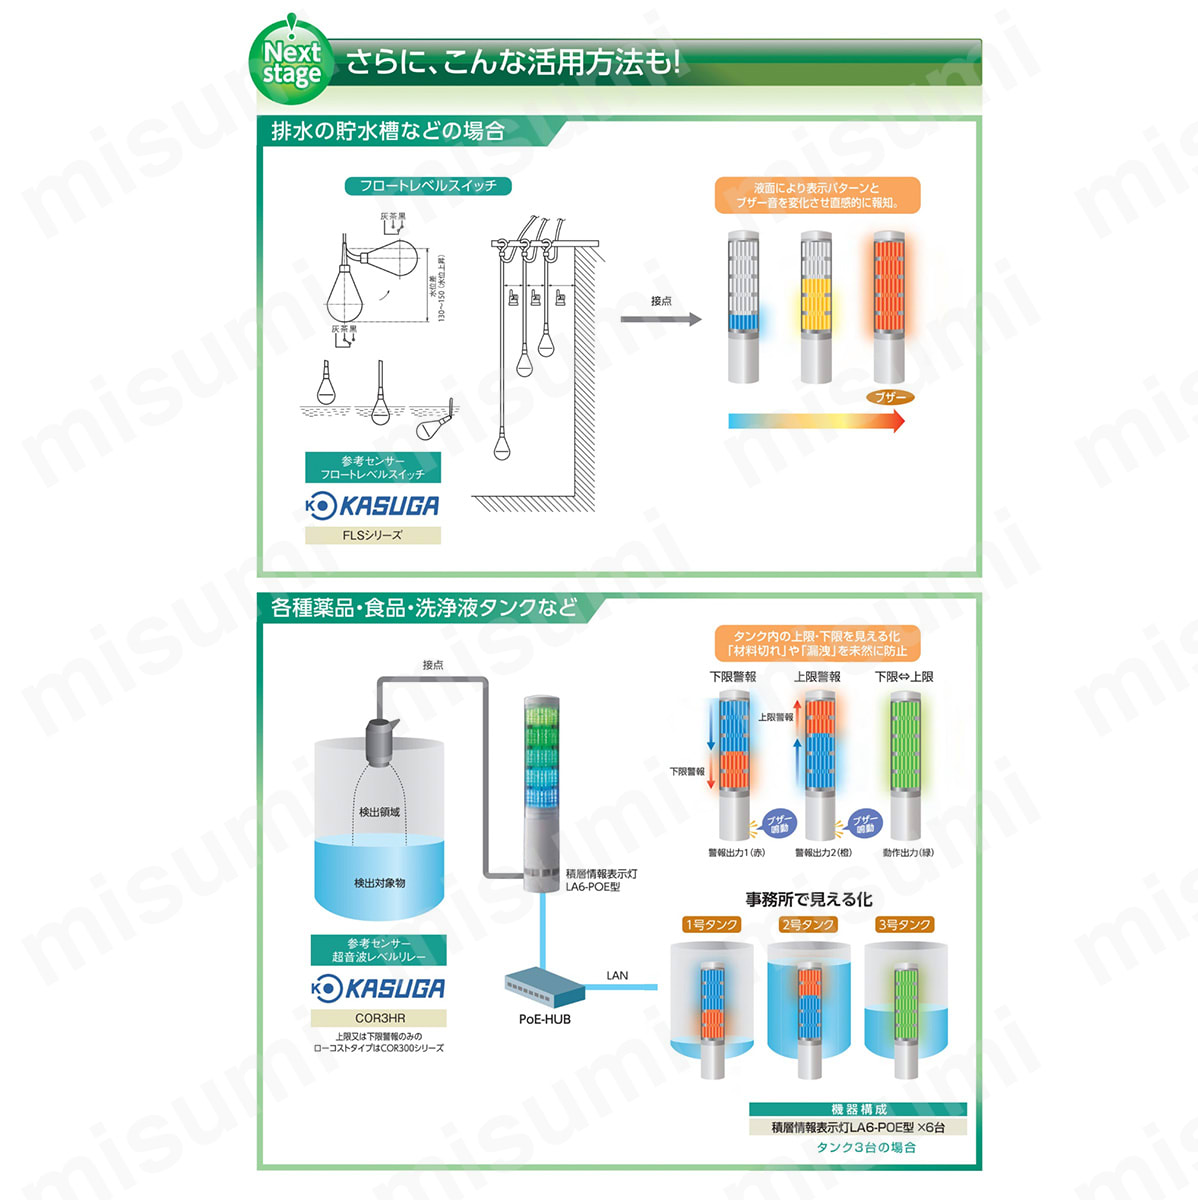 For wastewater storage tanks, etc. / tanks for various chemicals, food, cleaning fluids, etc.